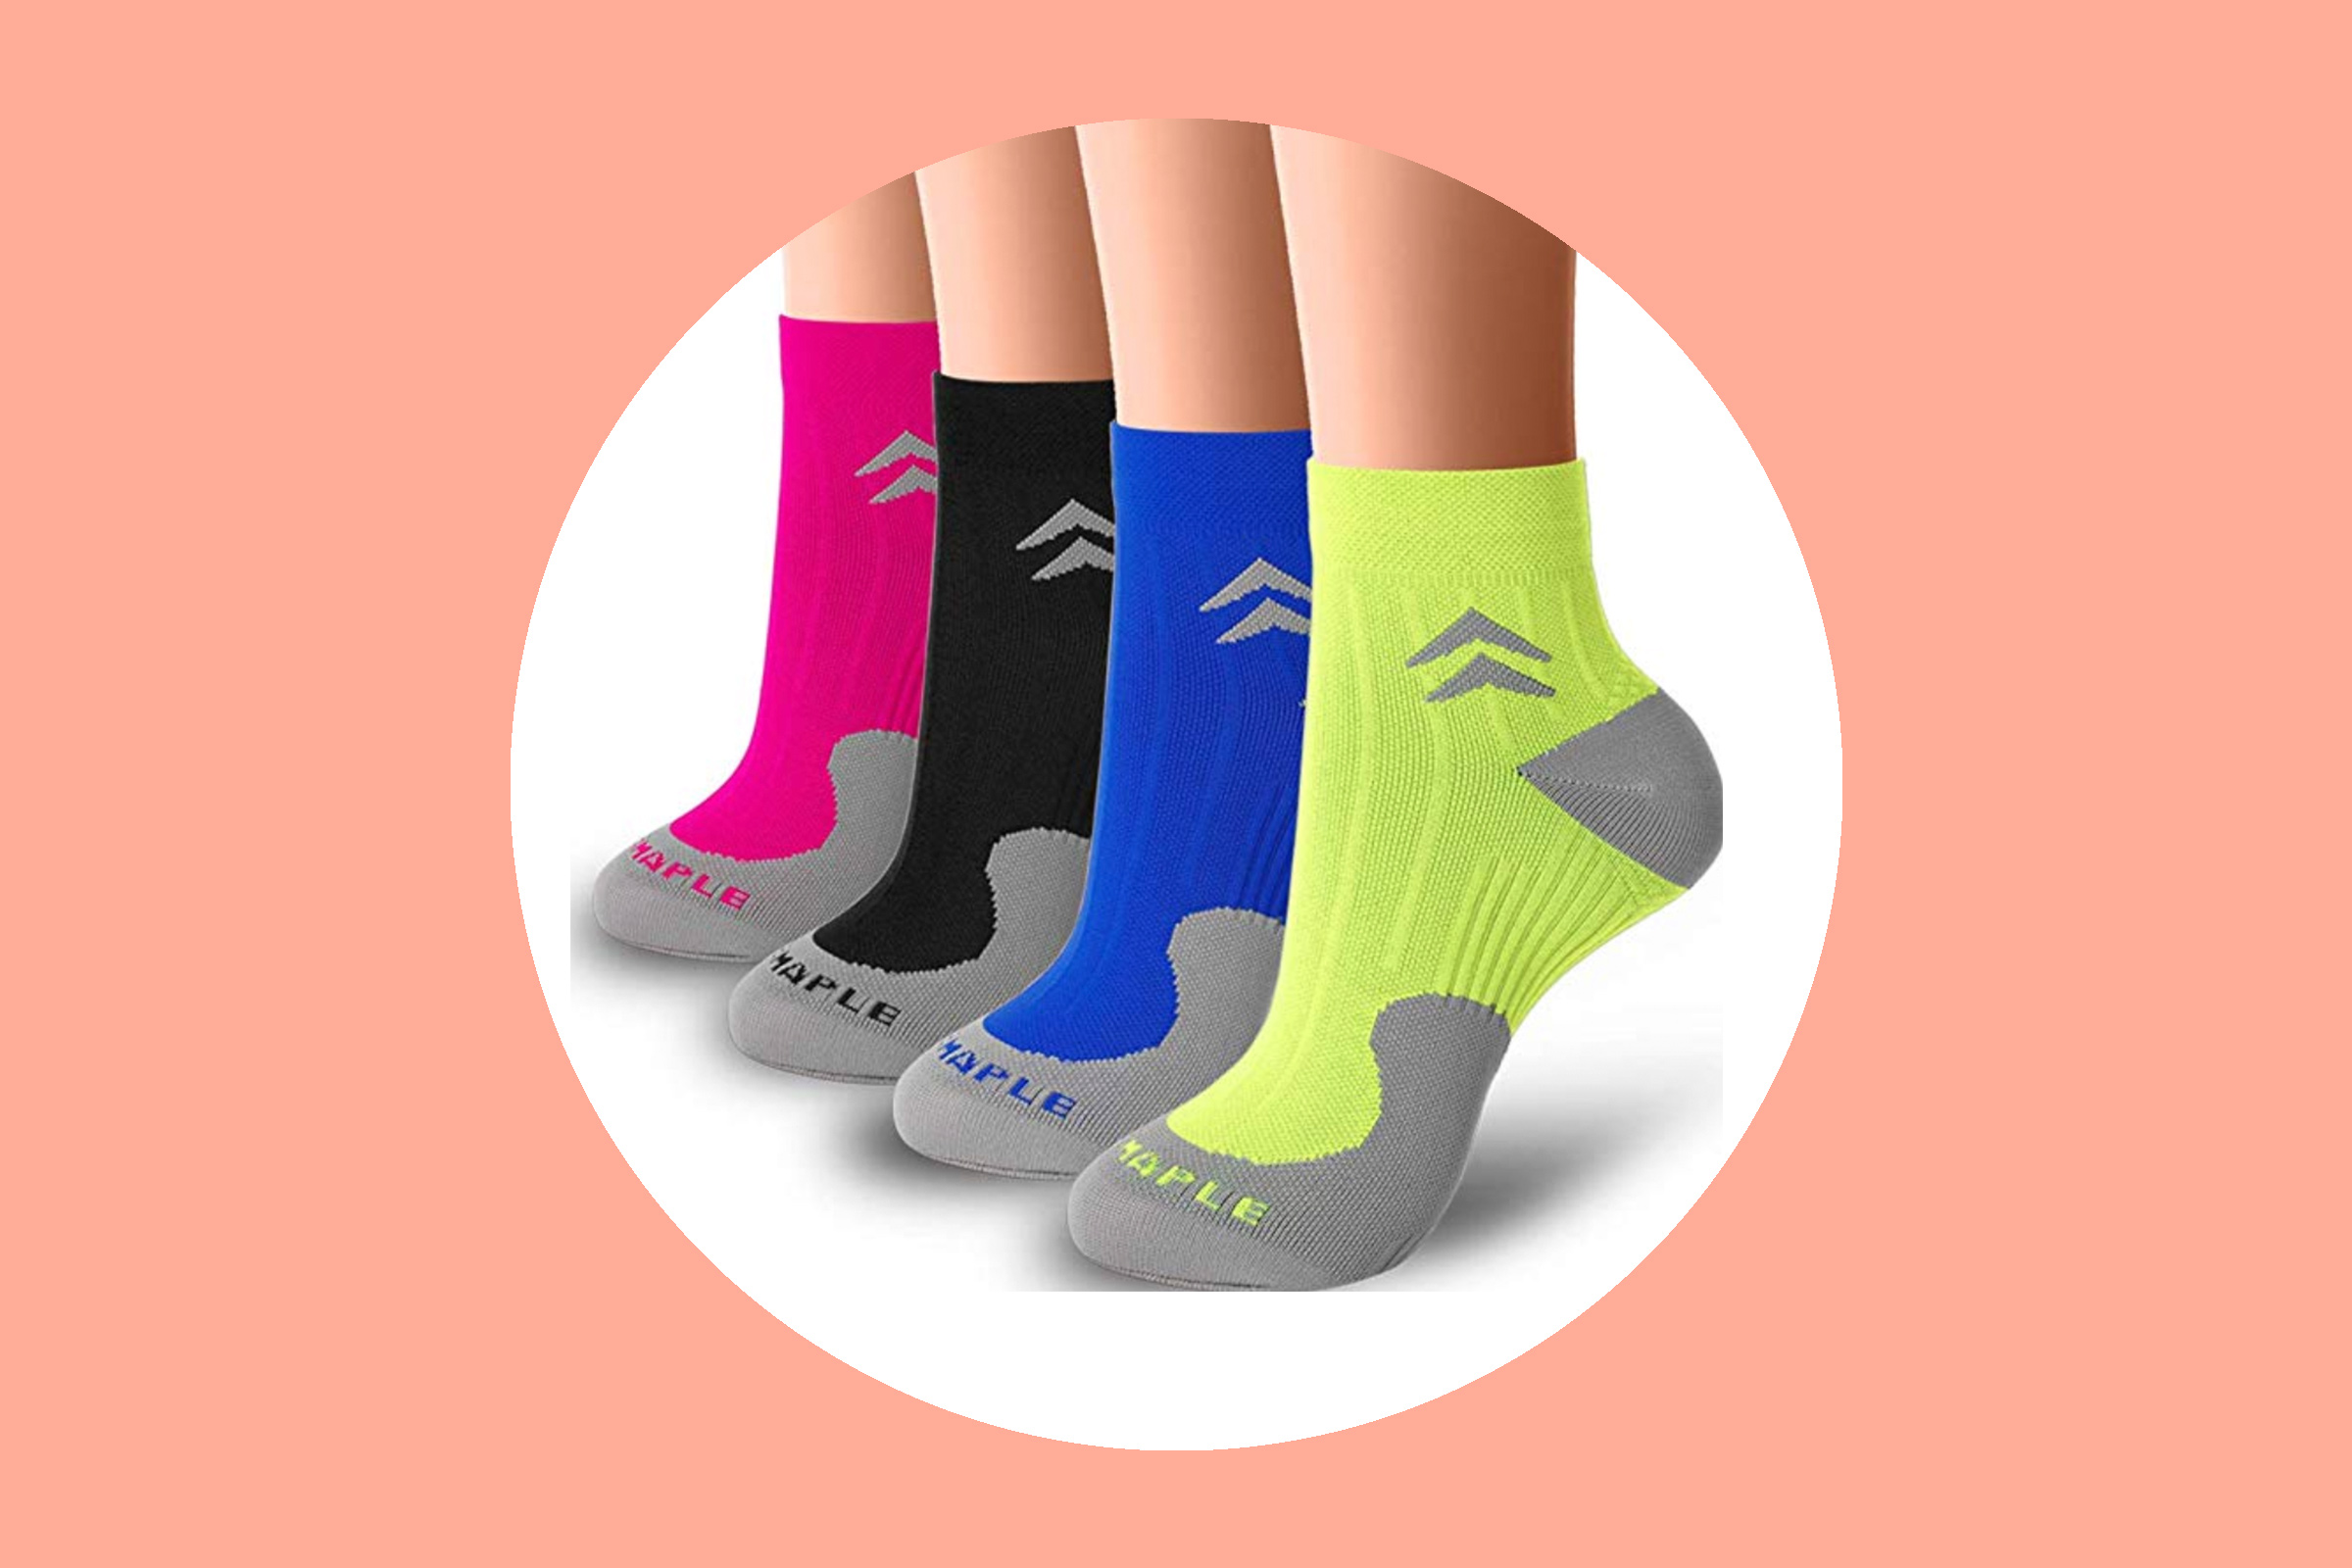 http://creakyjoints.org//wp-content/uploads/2019/11/1119_Arthritis_Gifts_Compression_Socks.jpg